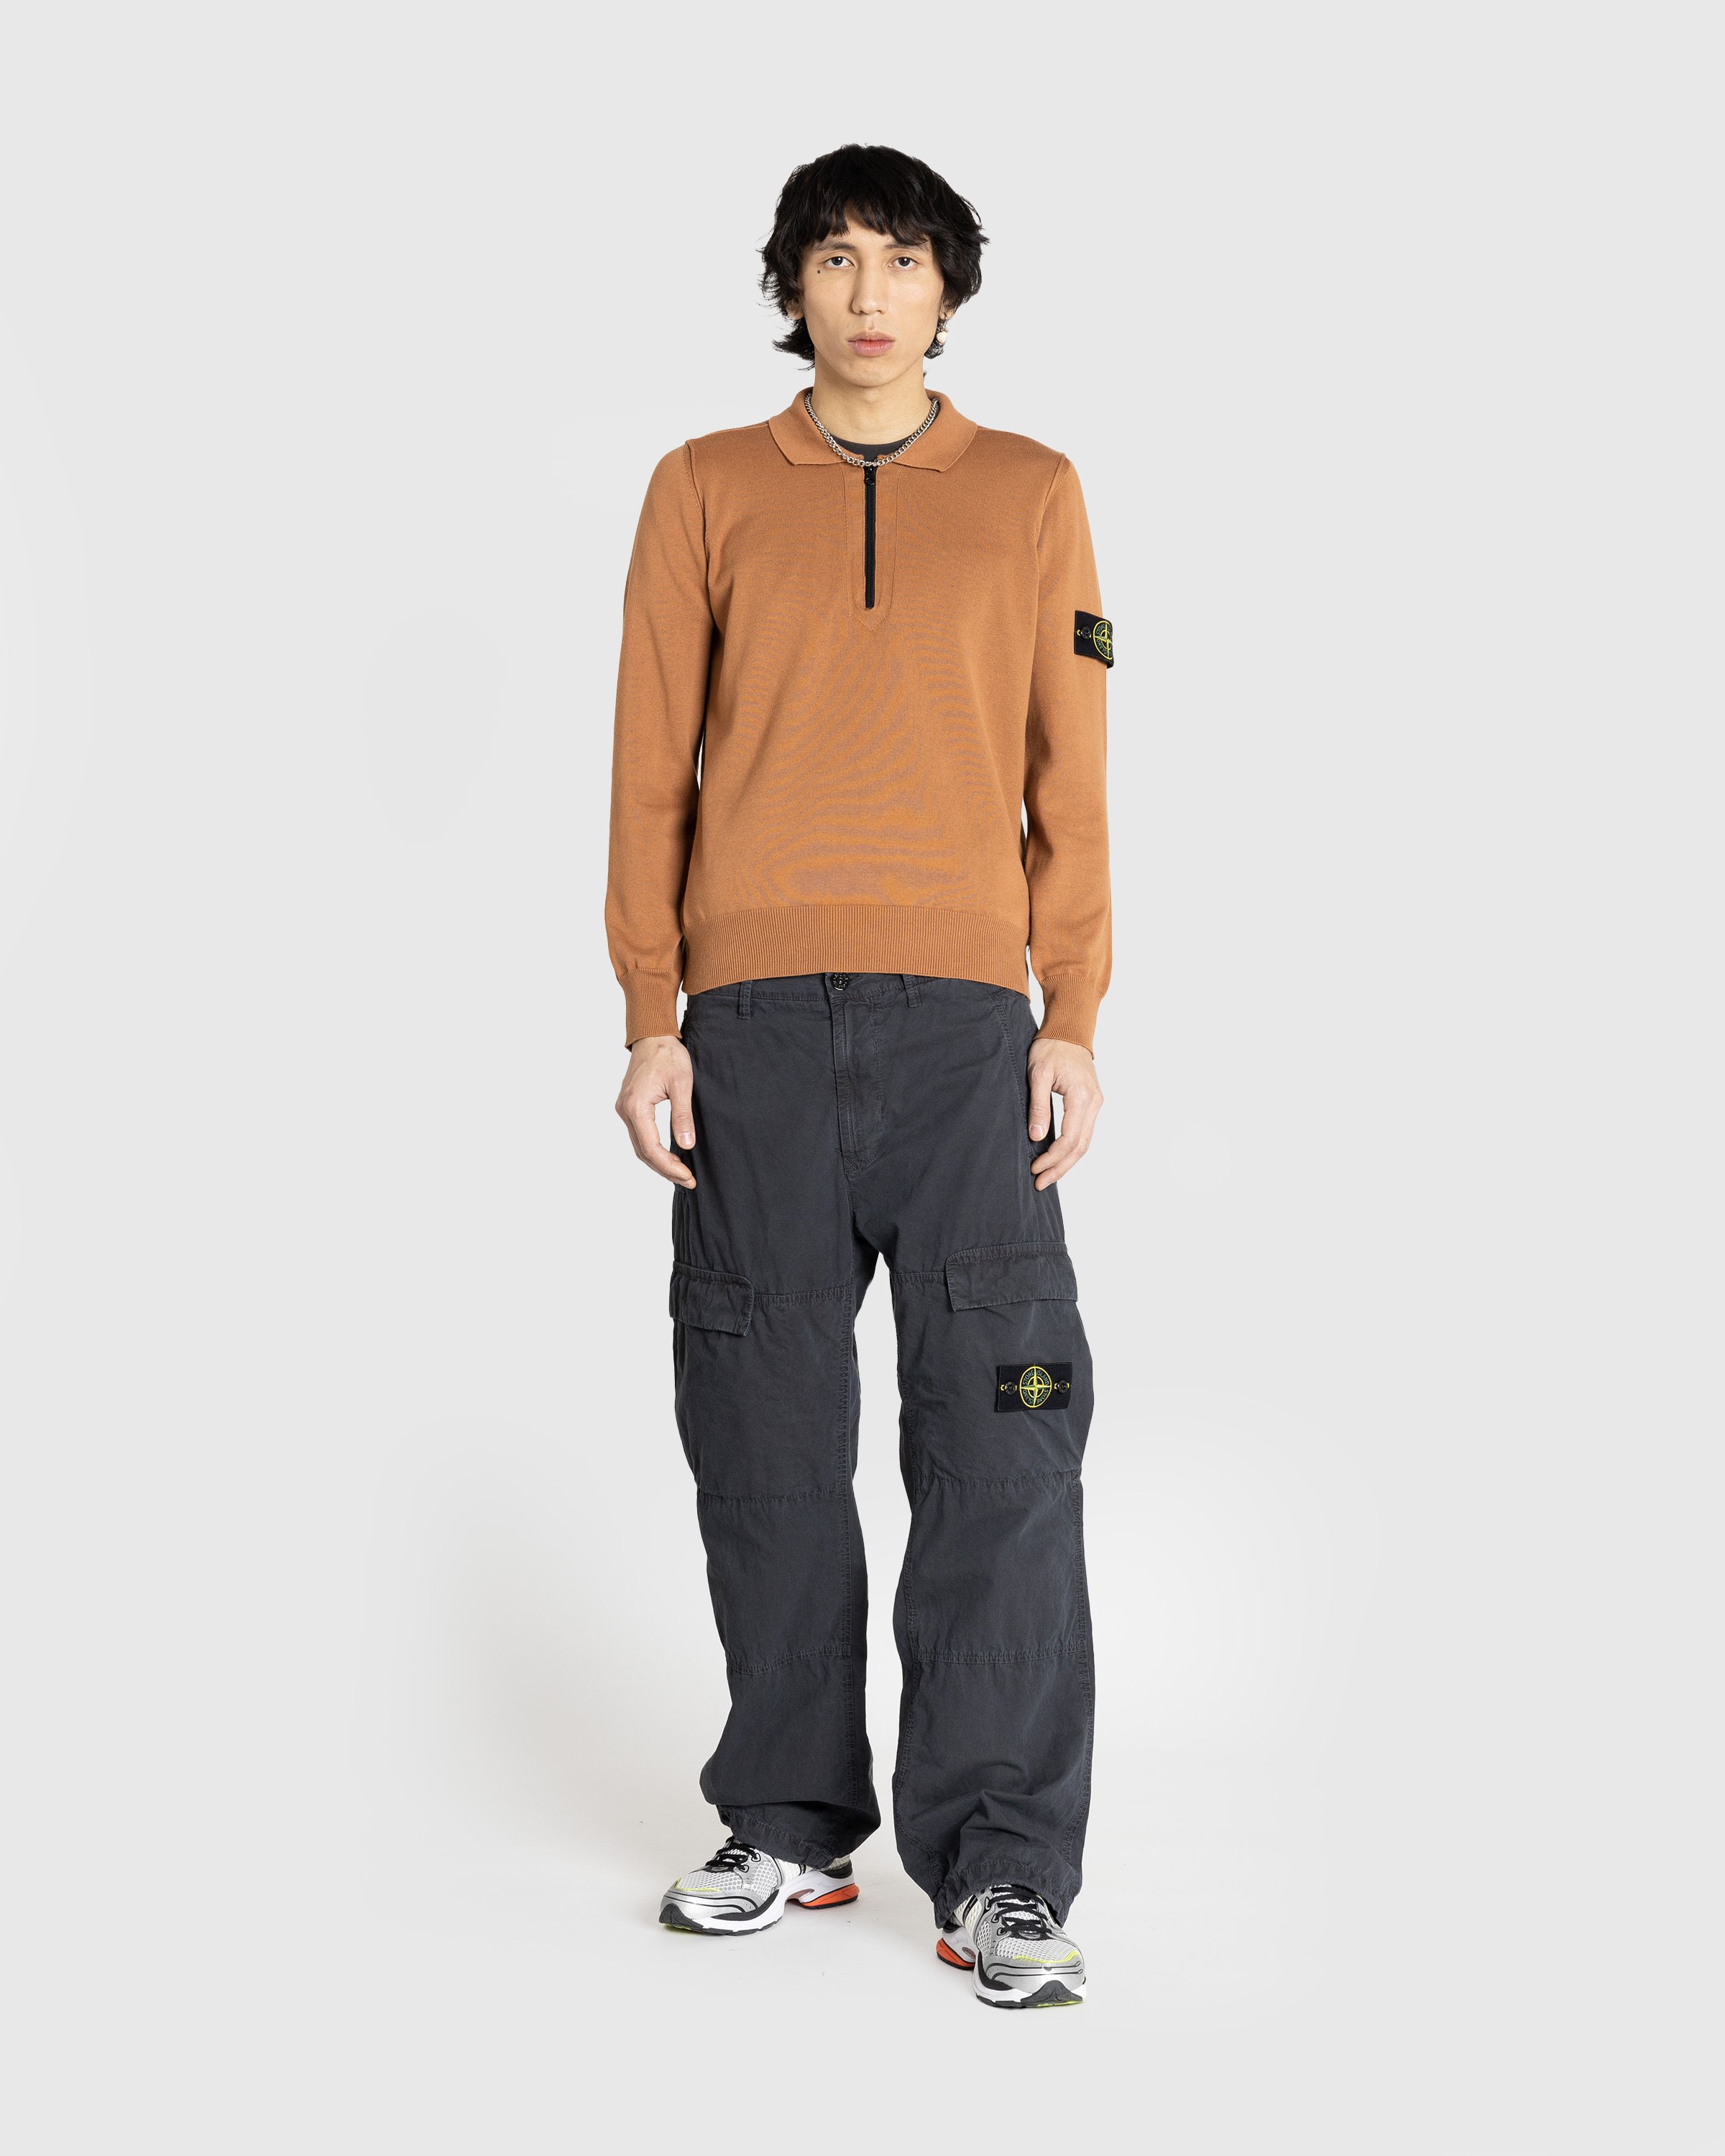 Stone Island - KNITWEAR RUST - Clothing - Red - Image 3